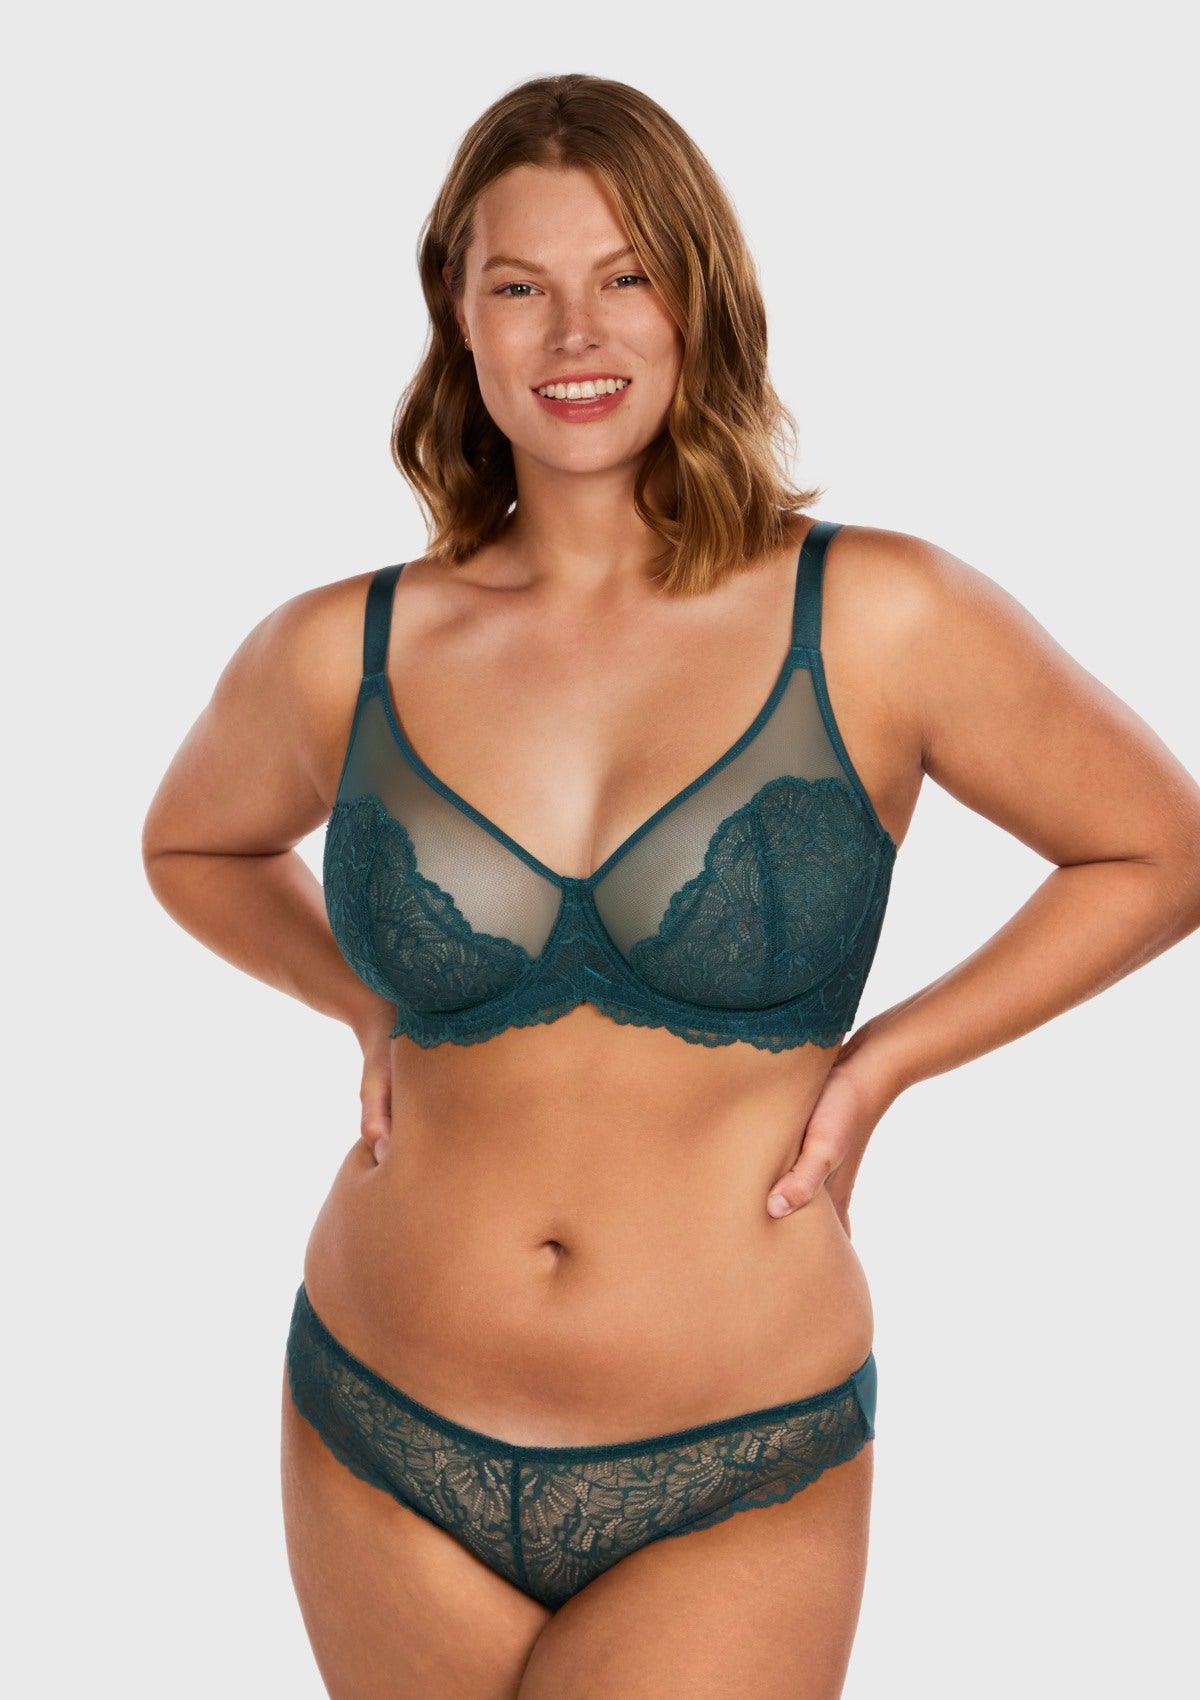 HSIA Blossom Full Figure See-Through Lace Bra For Side And Back Fat - Biscay Blue / 34 / DD/E